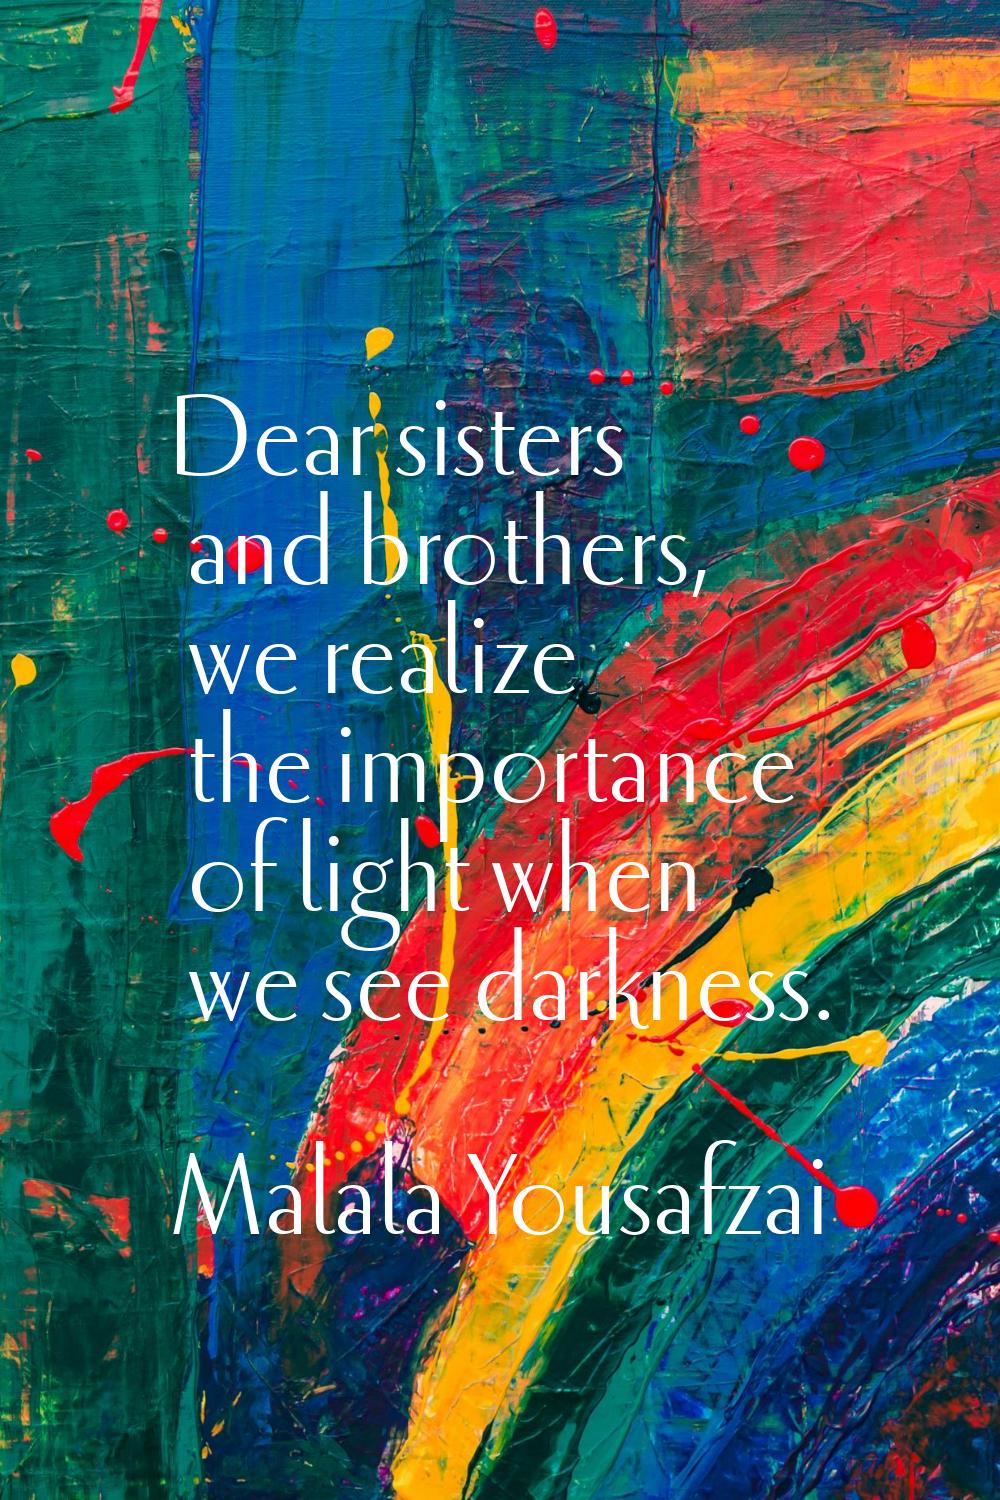 Dear sisters and brothers, we realize the importance of light when we see darkness.